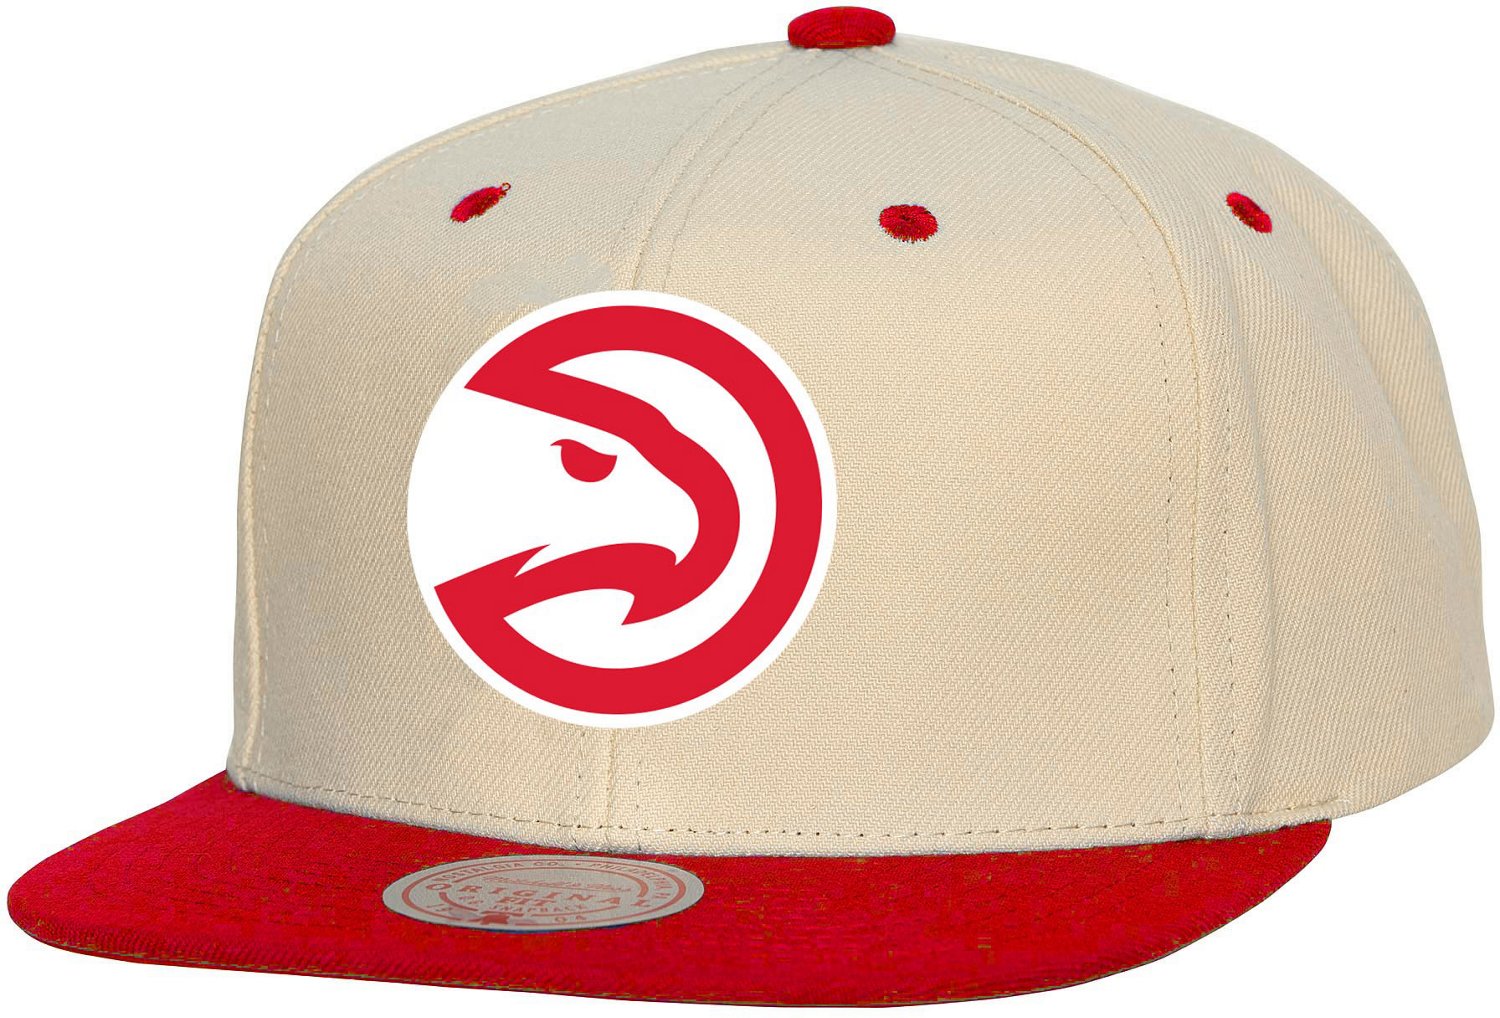 MITCHELL AND NESS 6HSSLD21078-HAWKS